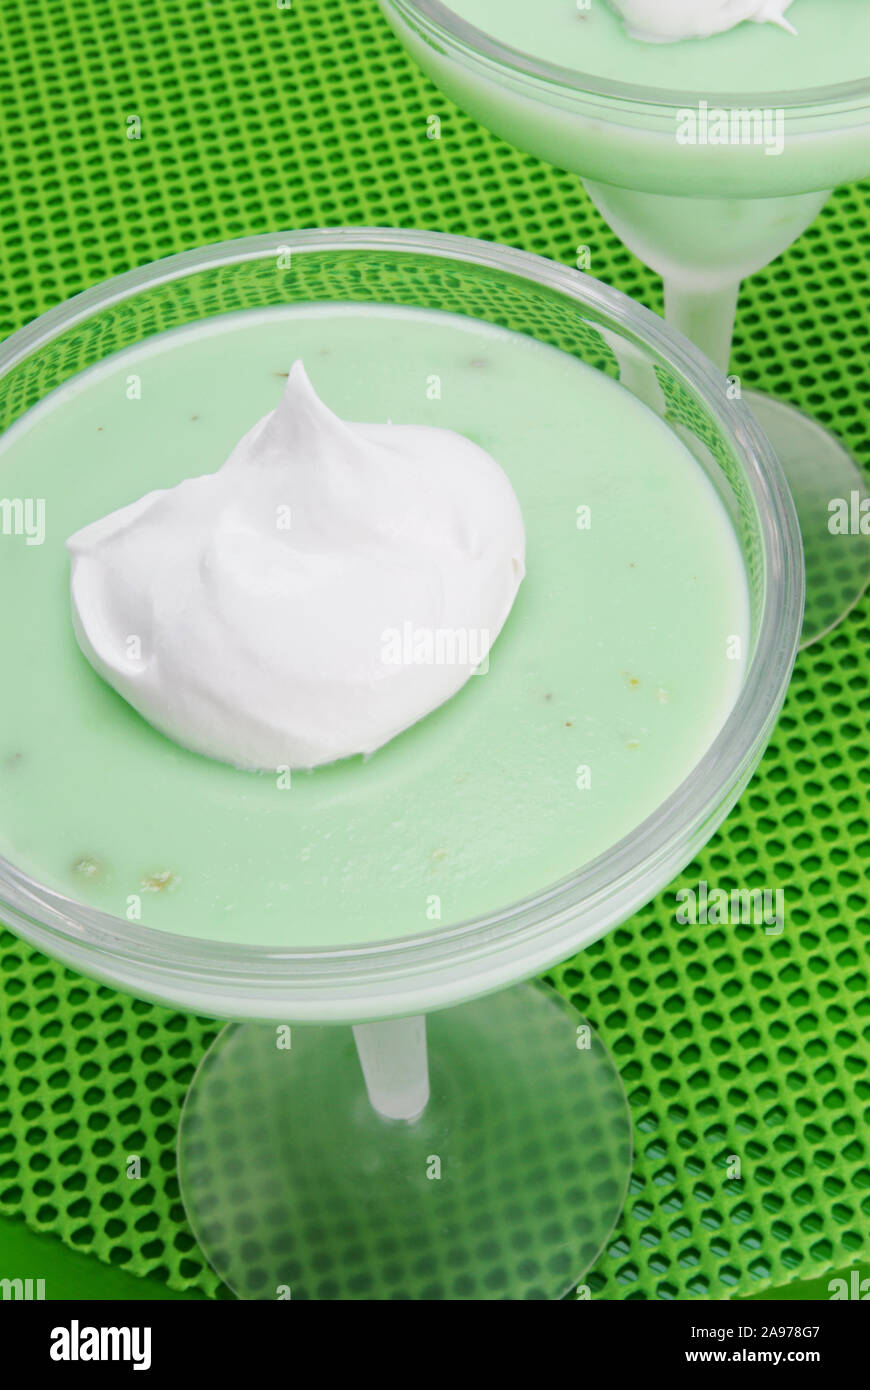 Overhead shot of homemade green colored pistachio pudding with a dollop of whipped cream on top served in two frosted margarita glasses. Naturally lit Stock Photo